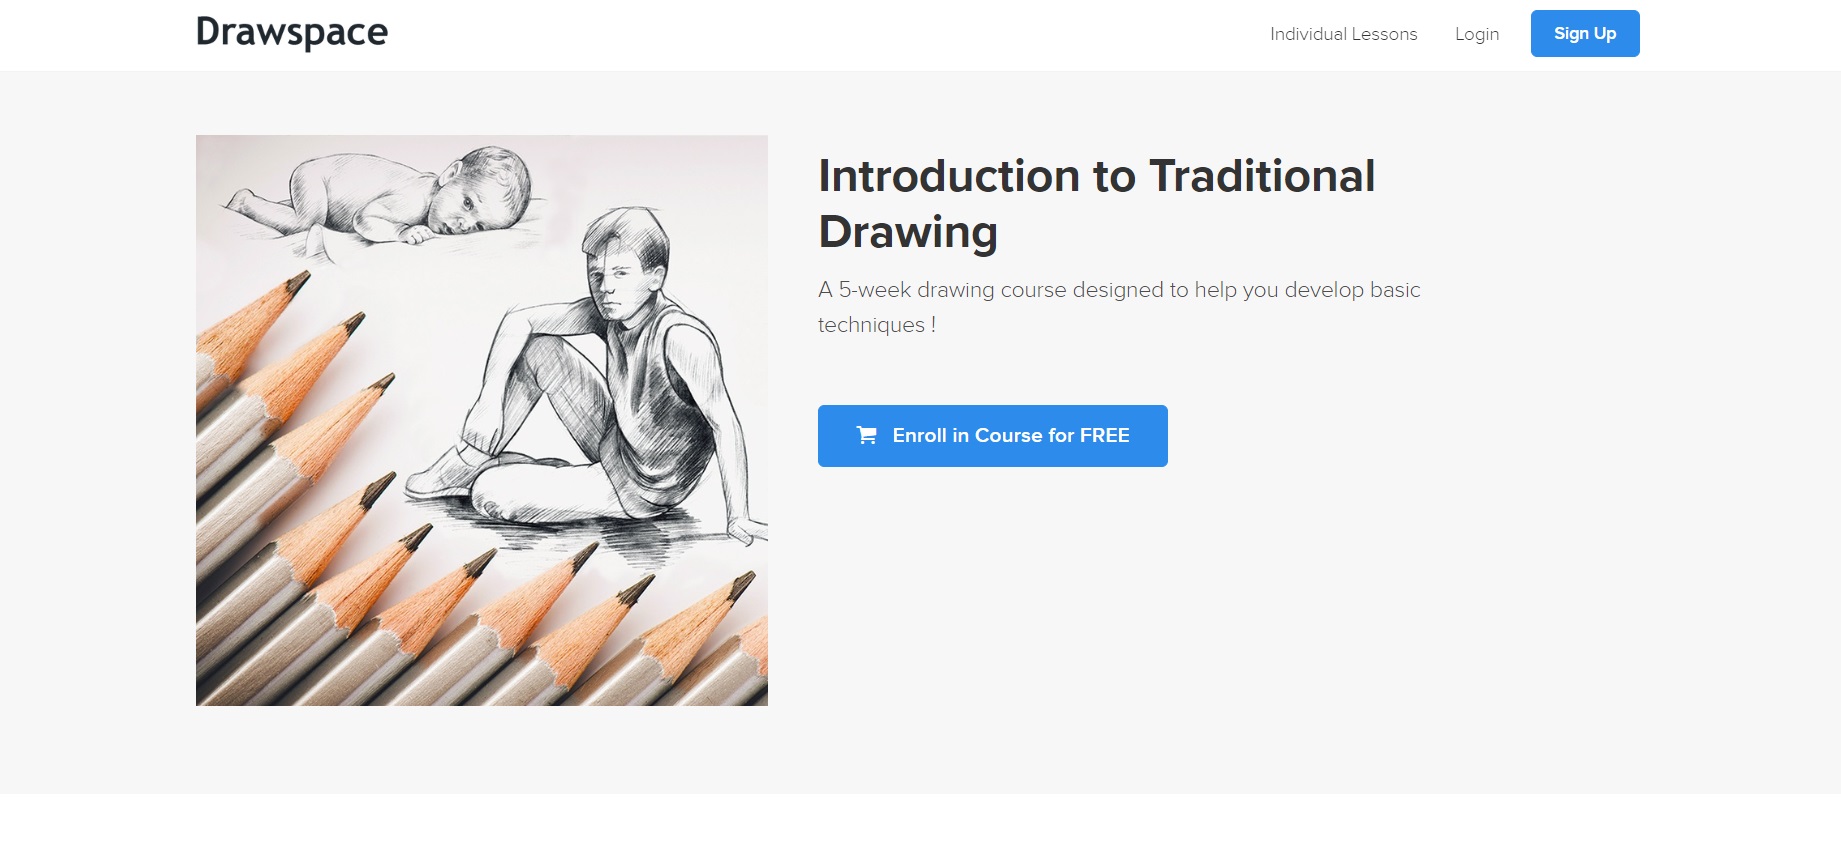 Introduction to Traditional Drawing